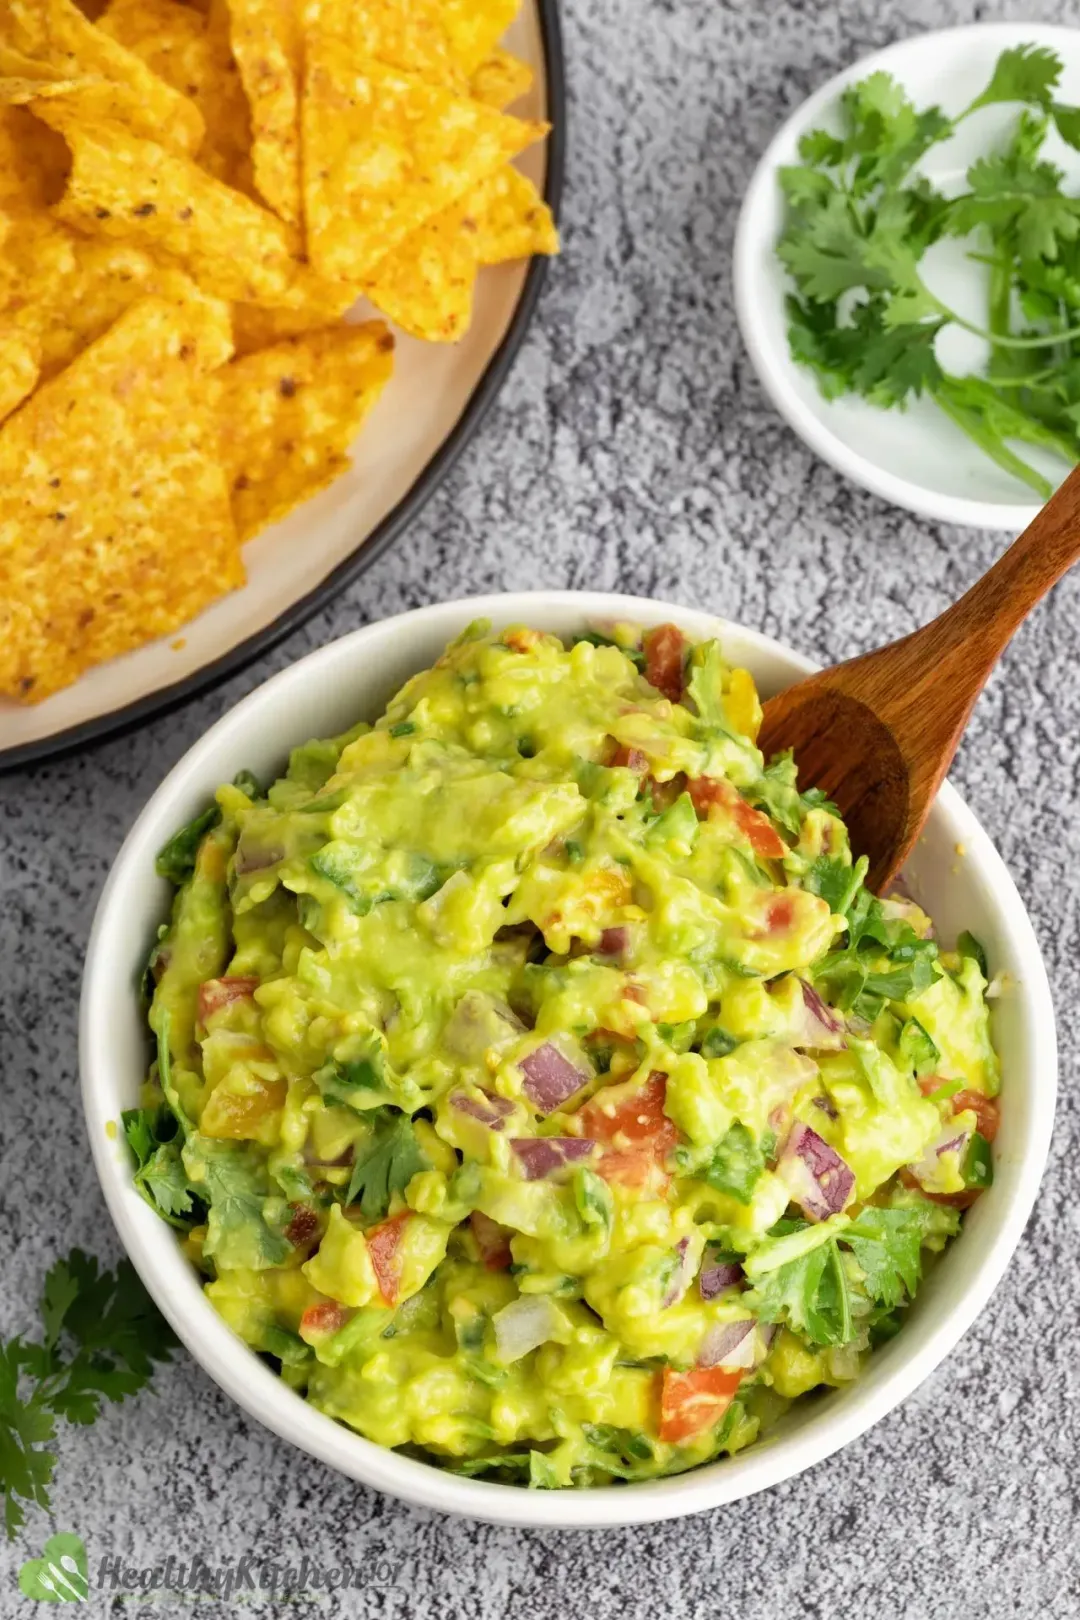 A bowl of guacamole, with a wooden spoon dunked in, and and some chips on a table.